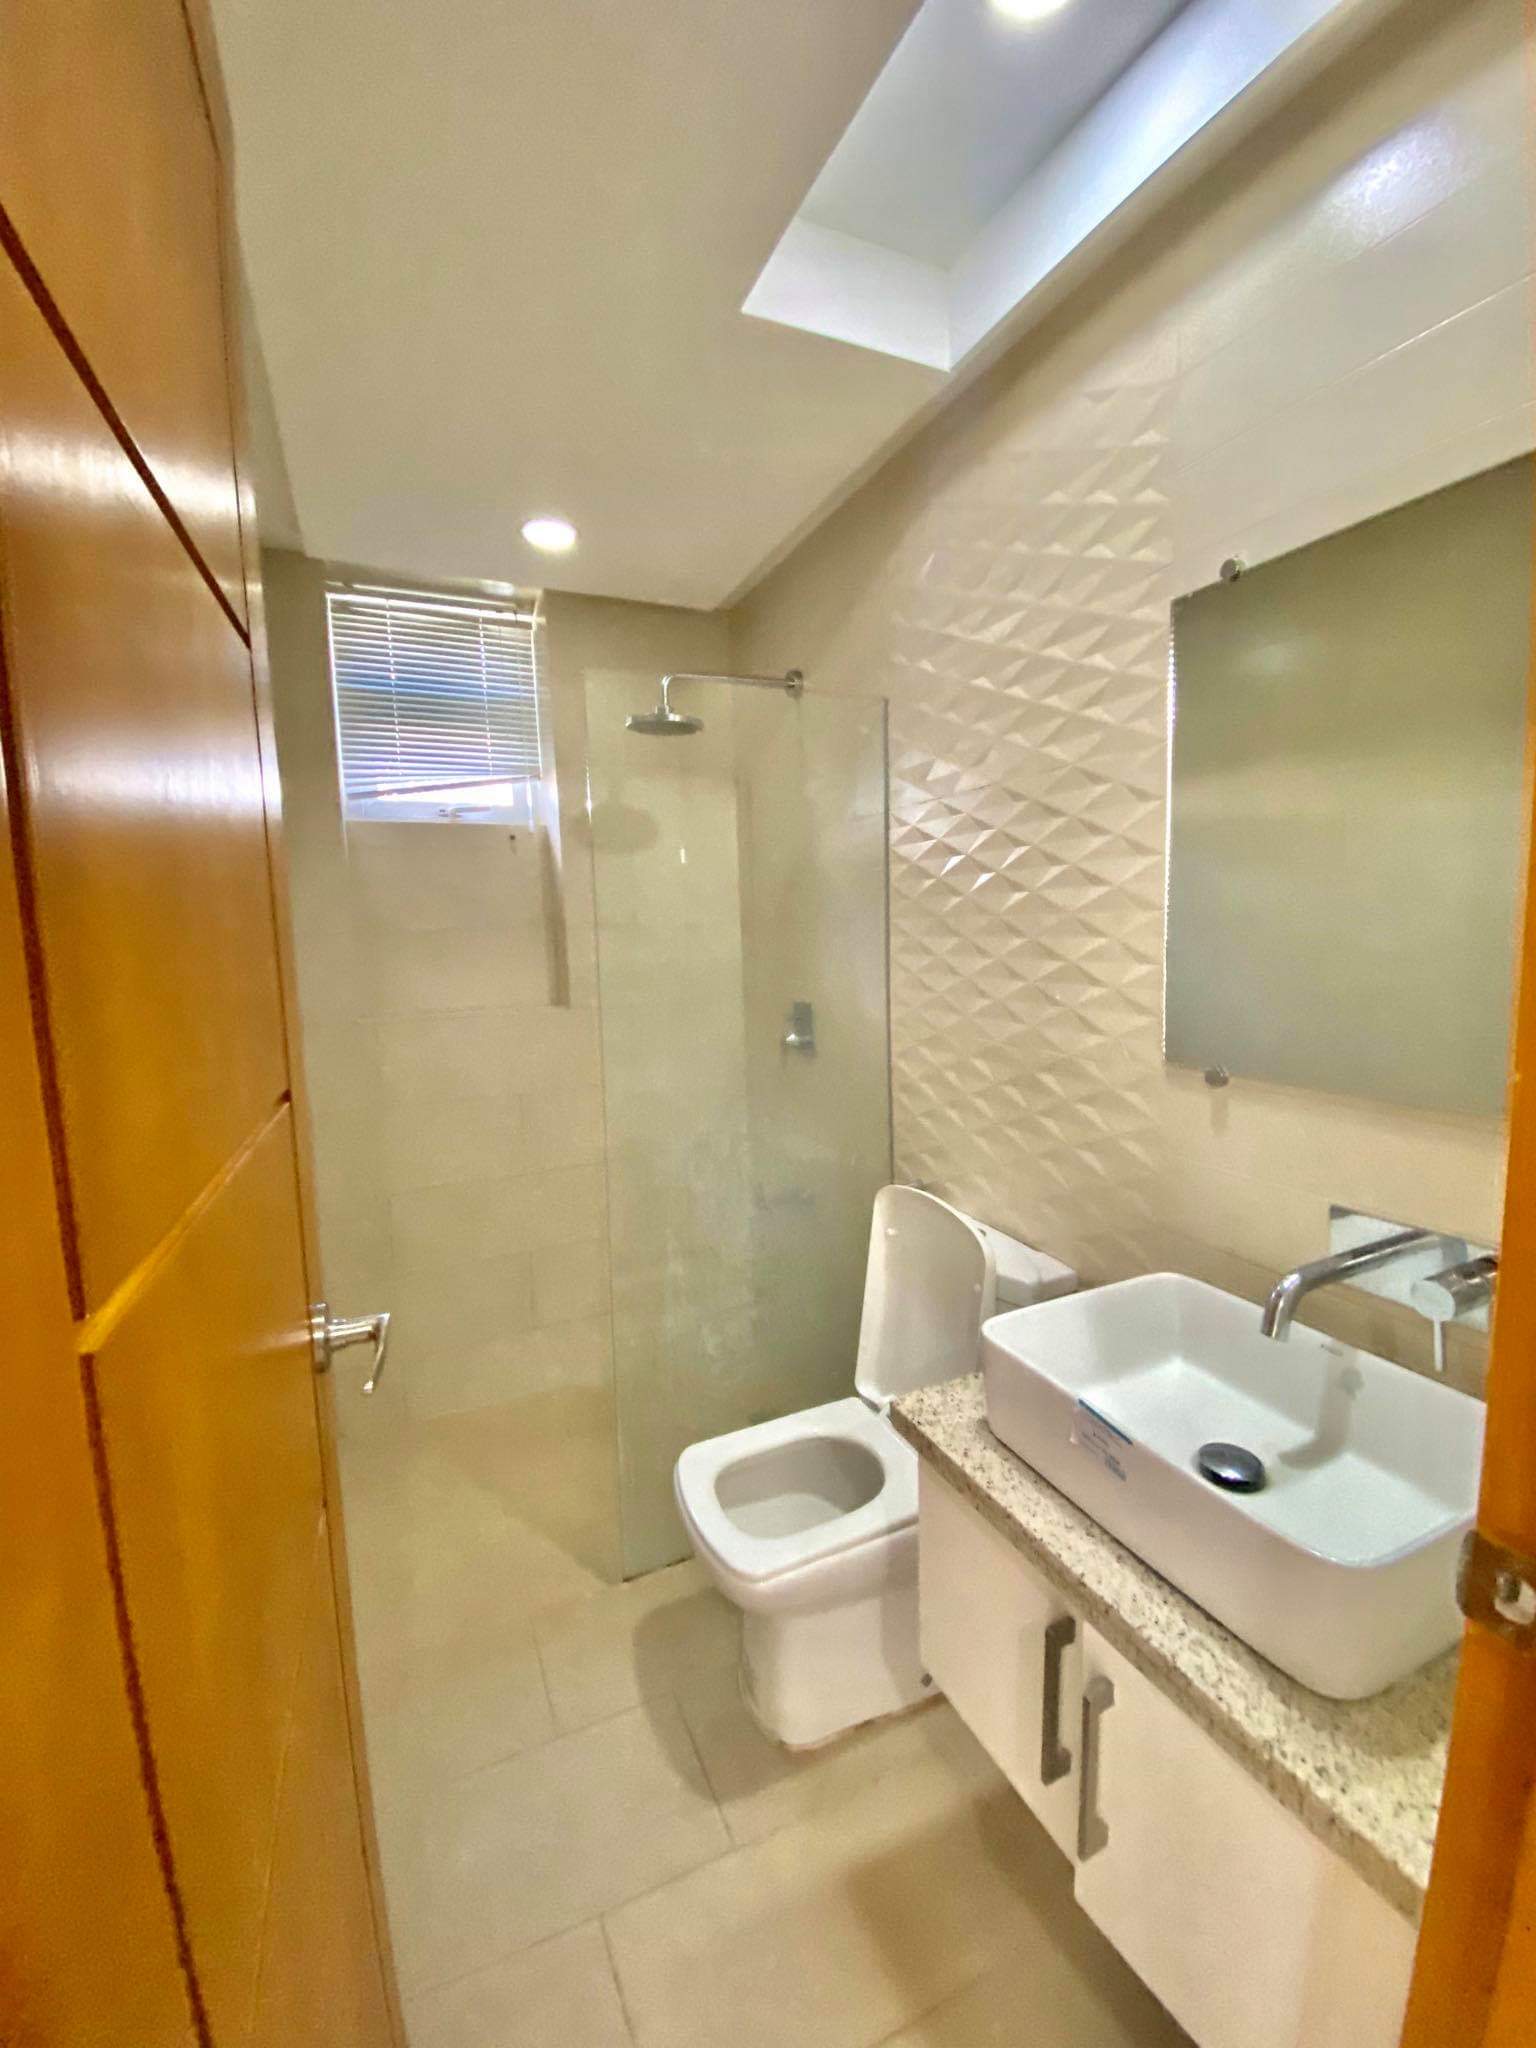 ELEGANT 9BR HOUSE AND LOT FOR SALE WITH POOL IN ANGELES PAMPANGA